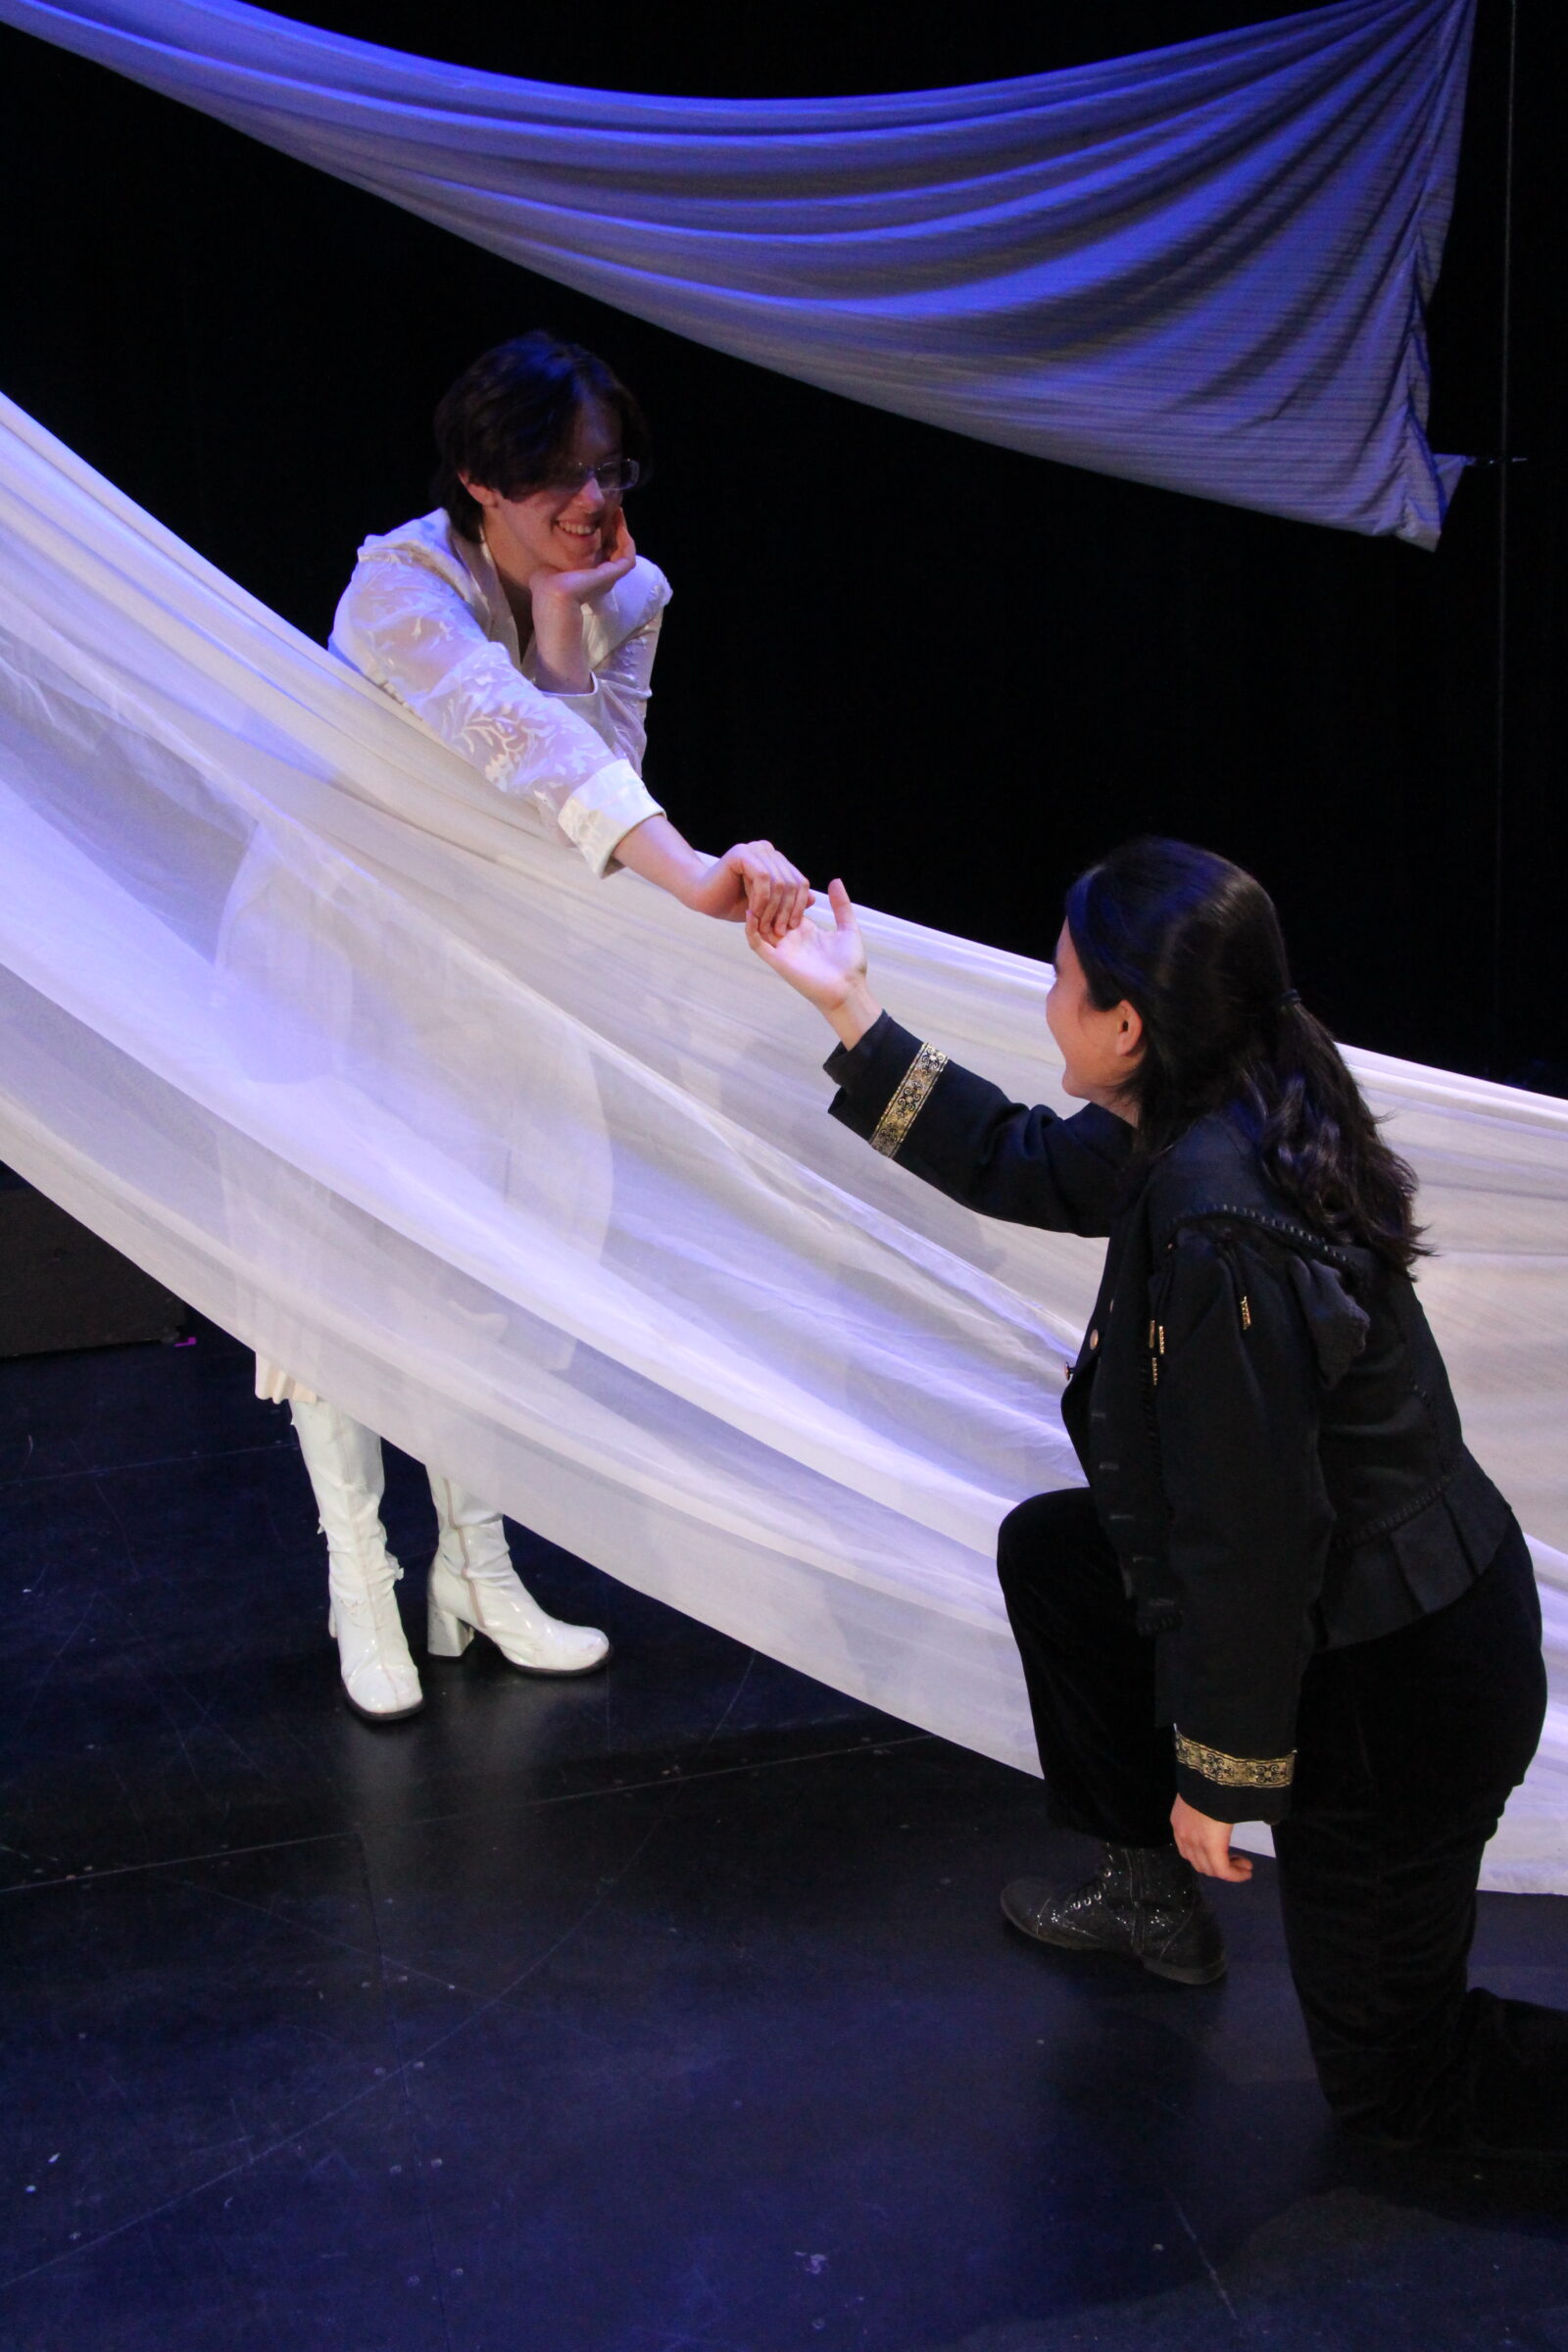 Two student actors enacting a scene from Romeo and Juliet.